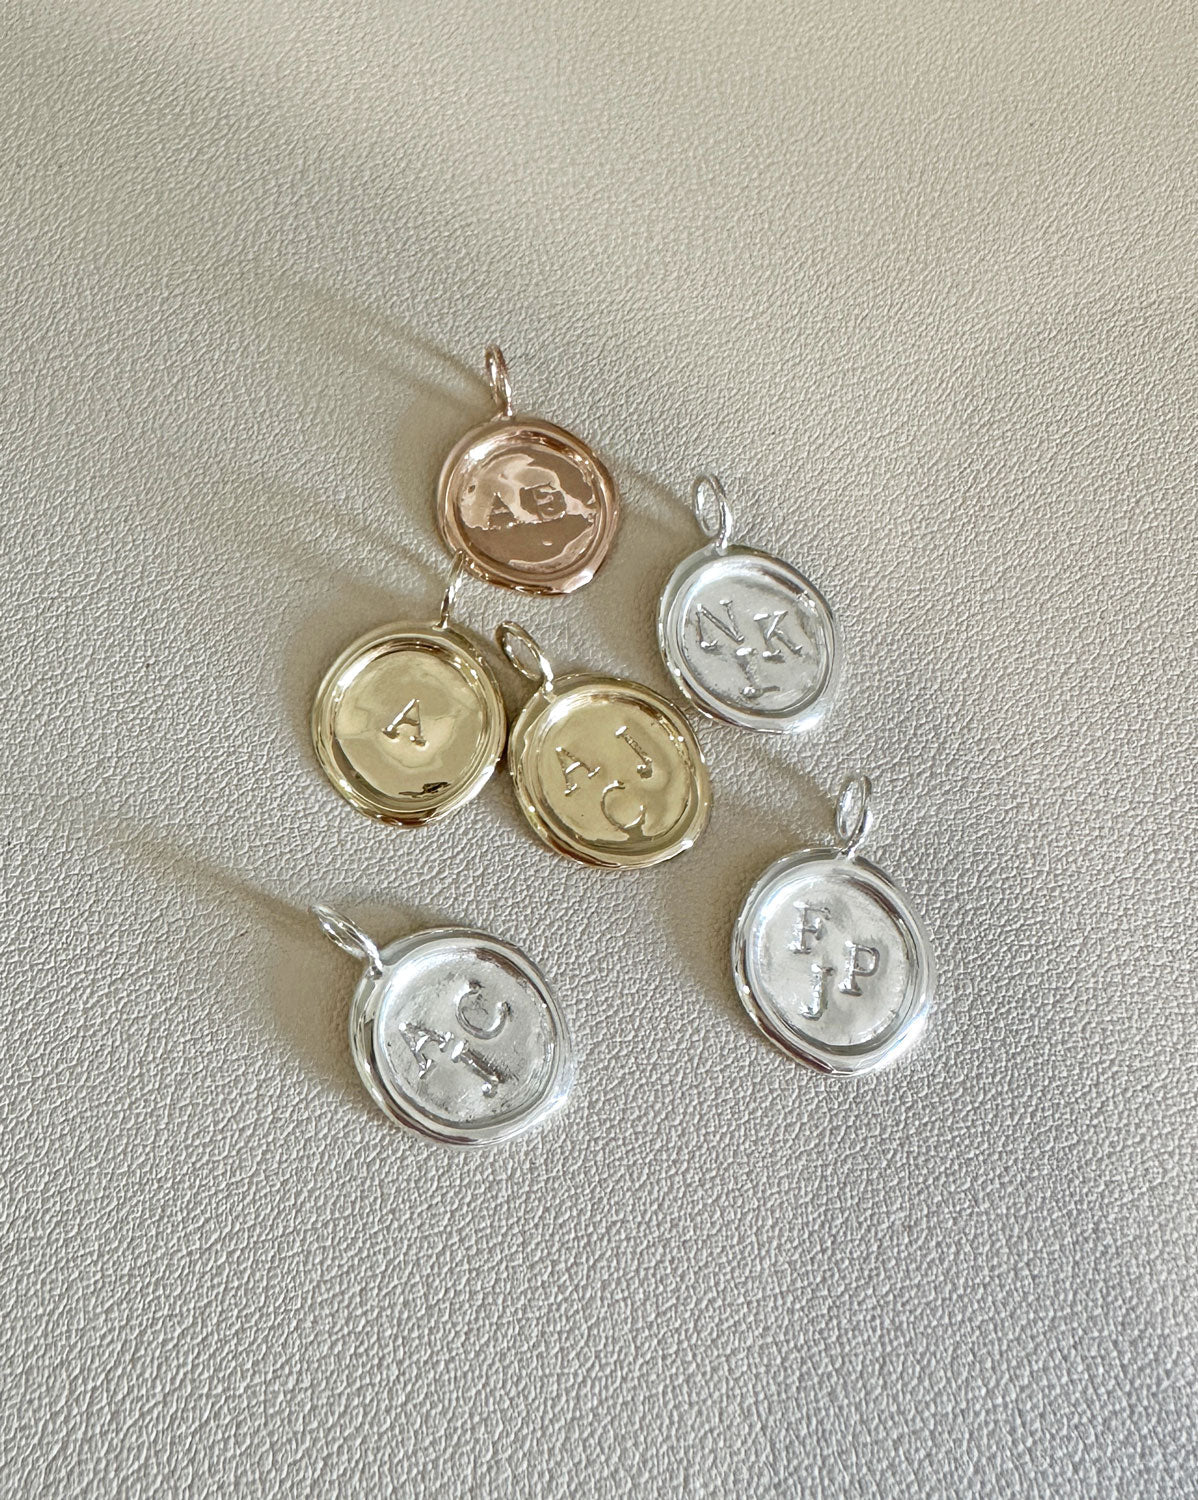 Double Initial Necklace (Silver)